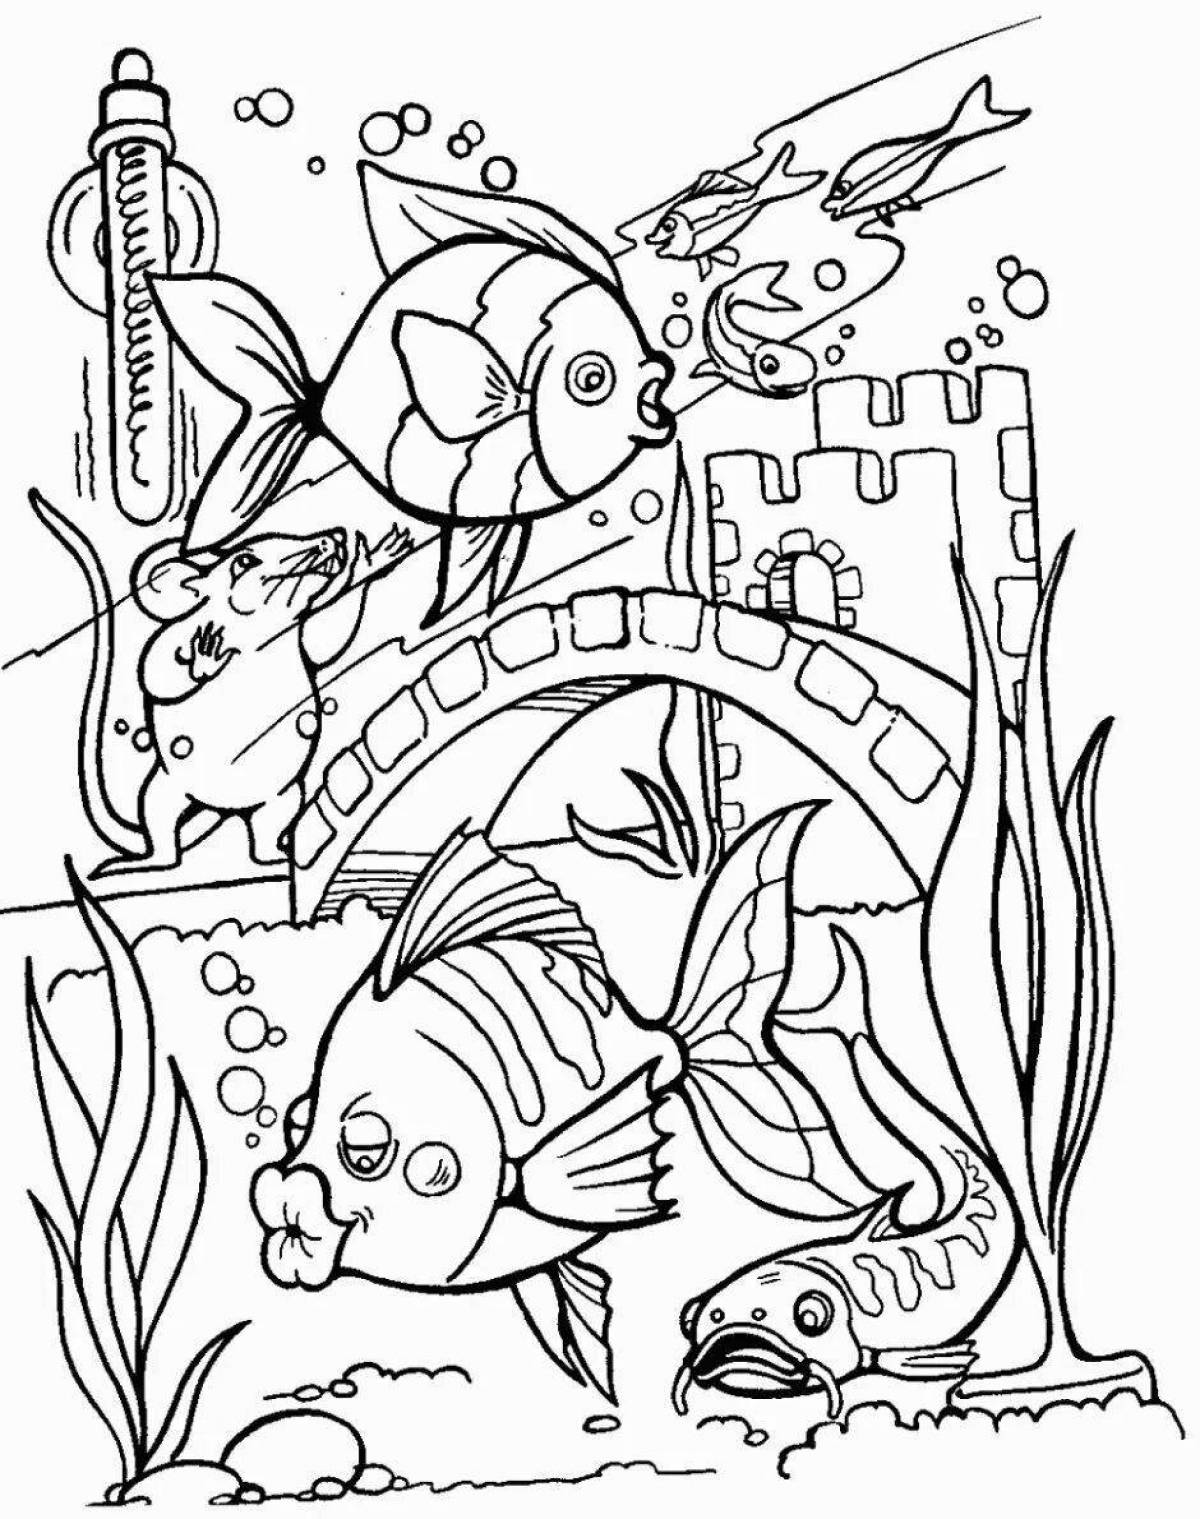 Live fish coloring book for children 6-7 years old